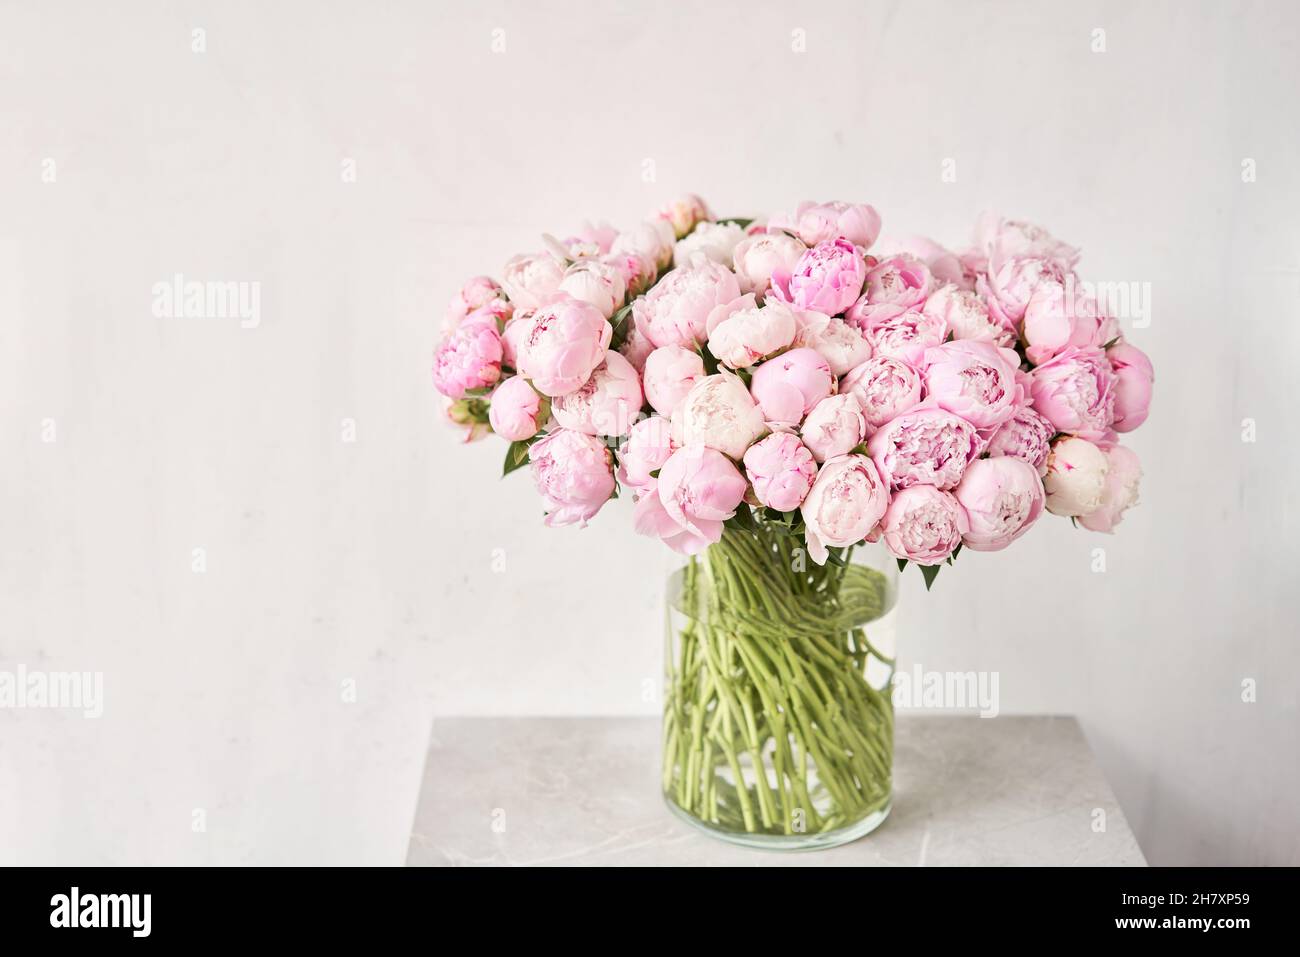 Cute and lovely peony. many layered petals. Bunch pale pink peonies flowers light gray background. Wallpaper, Stock Photo